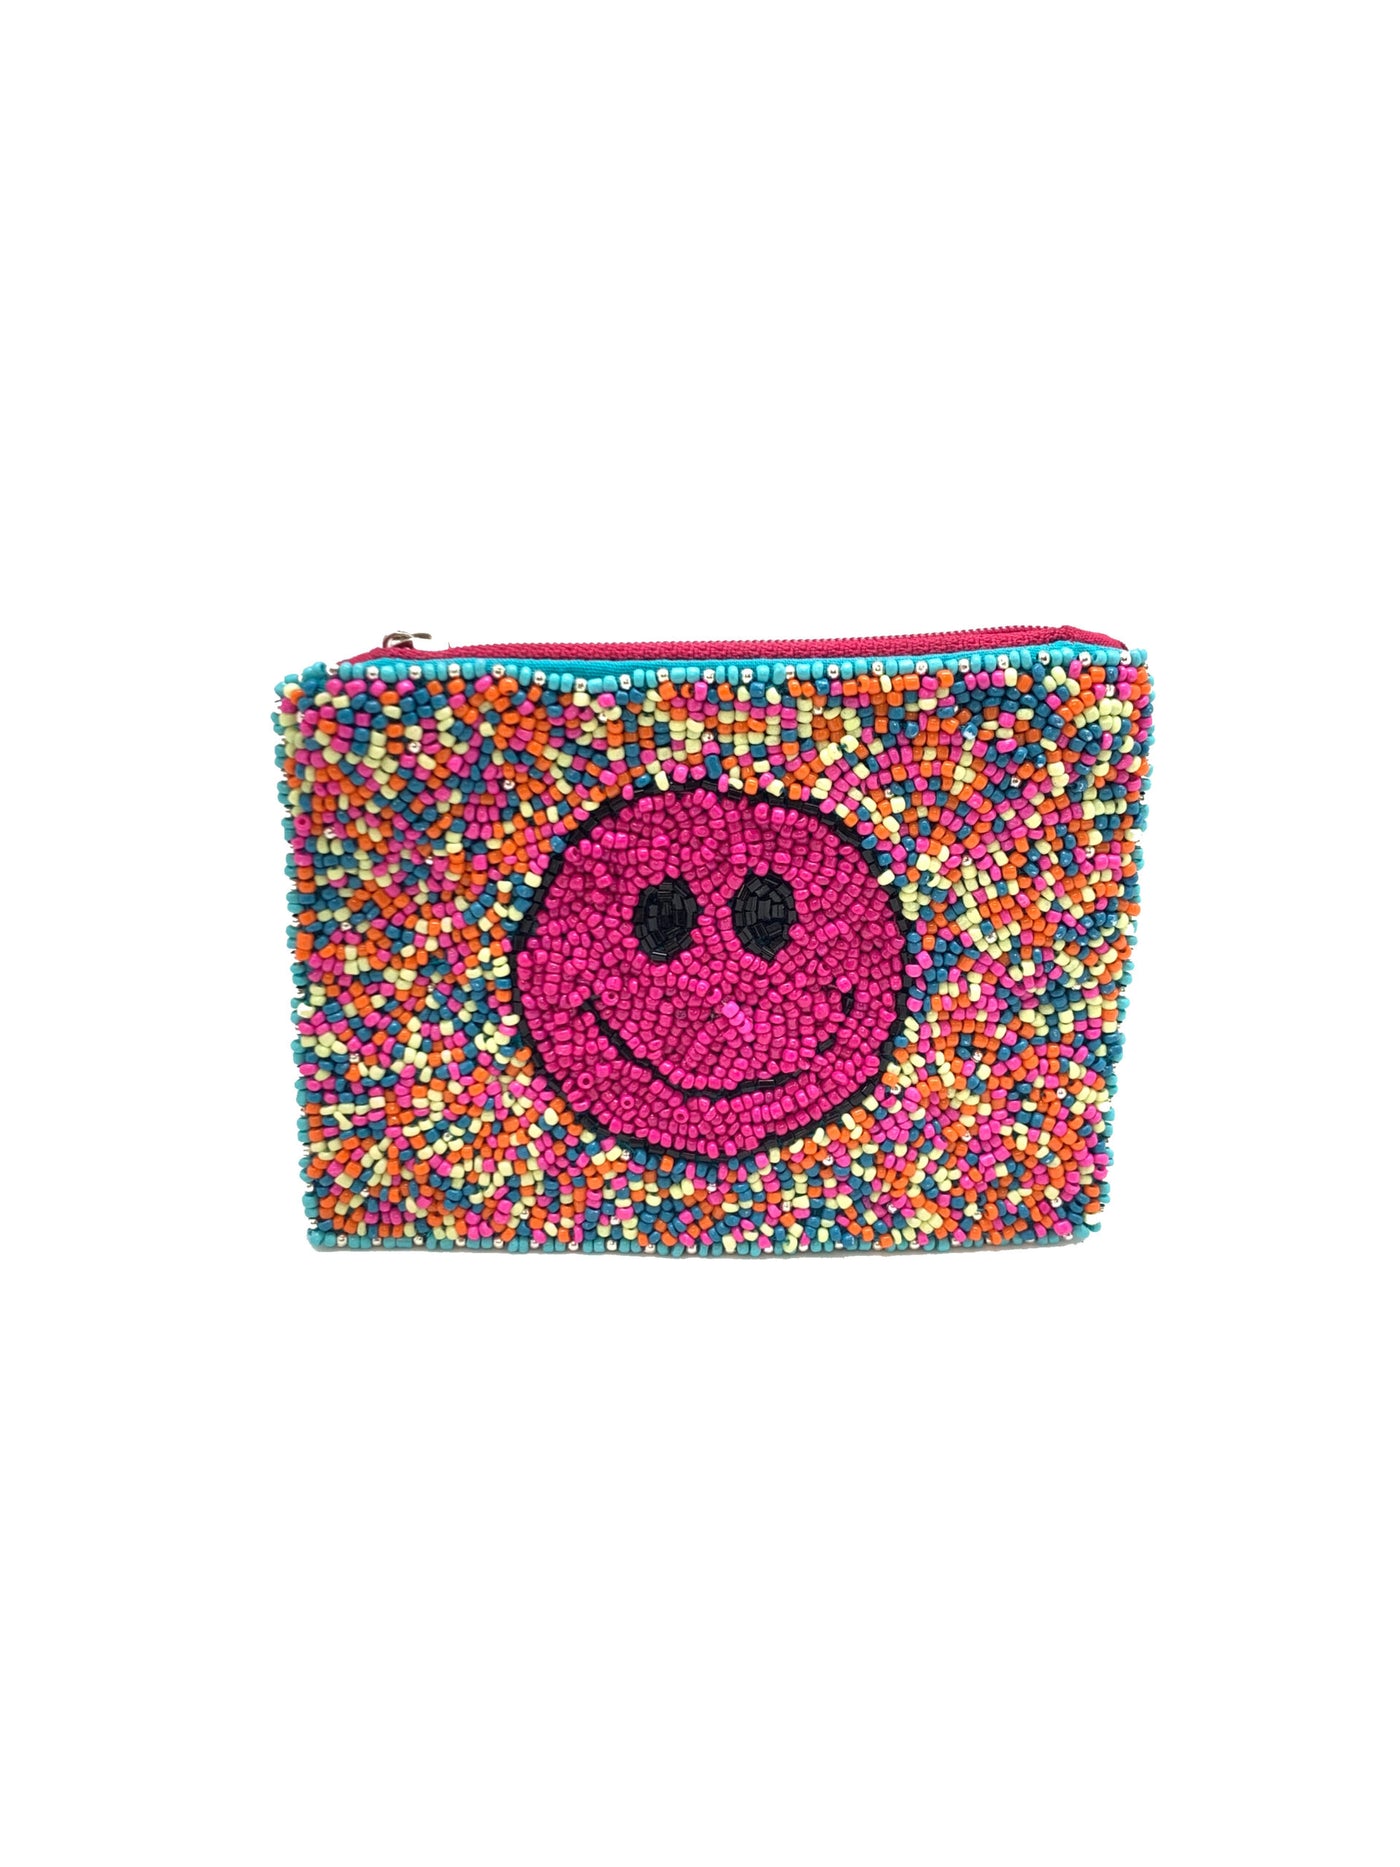 BEADED COIN POUCH